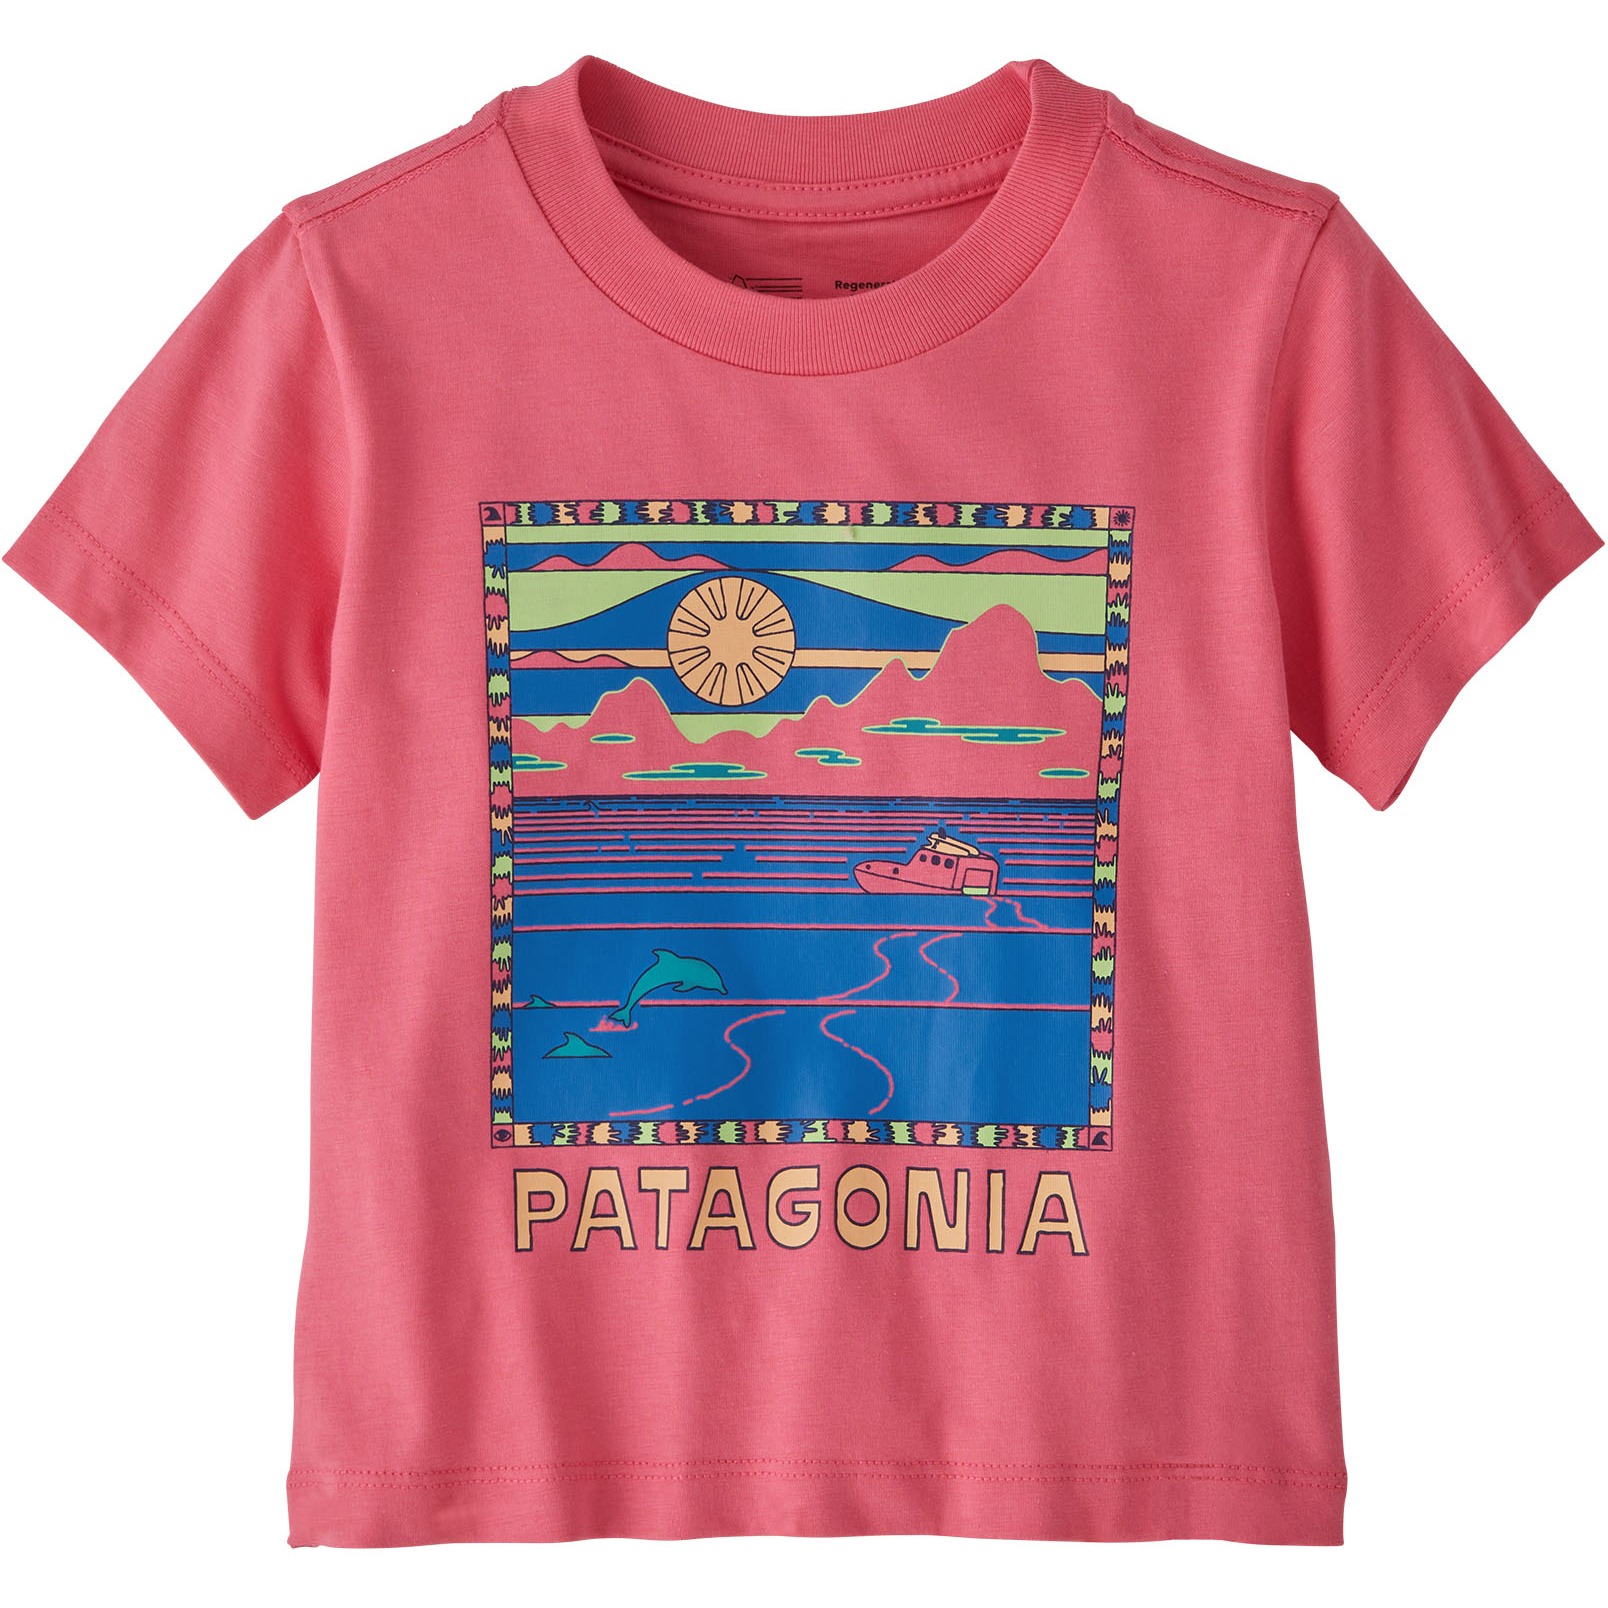 Productfoto van Patagonia Graphic T-Shirt Baby - Summit Swell: Afternoon Pink